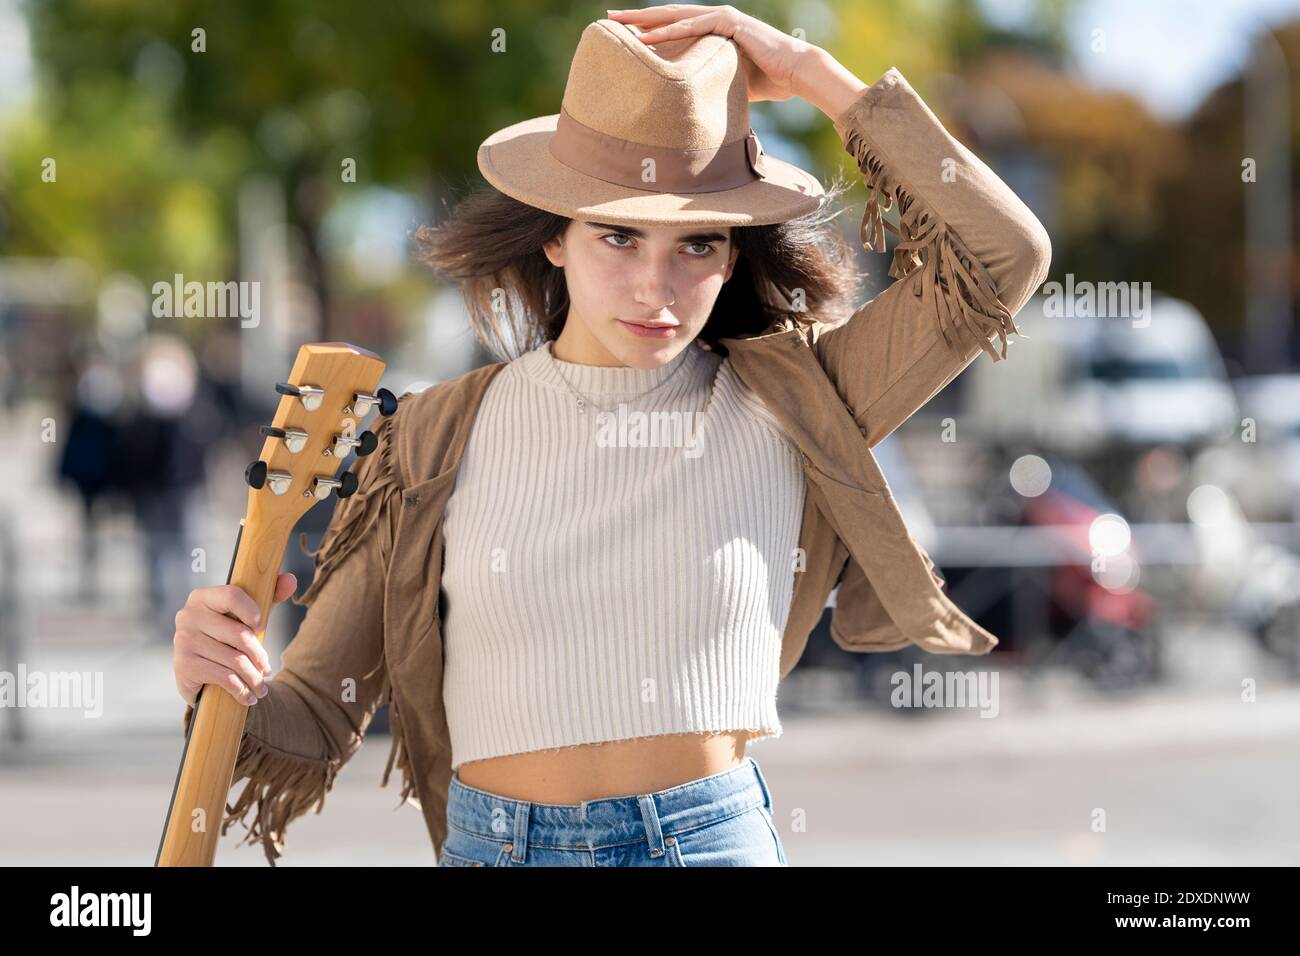 Young woman wearing hat and holding guitar on sunny day Stock Photo